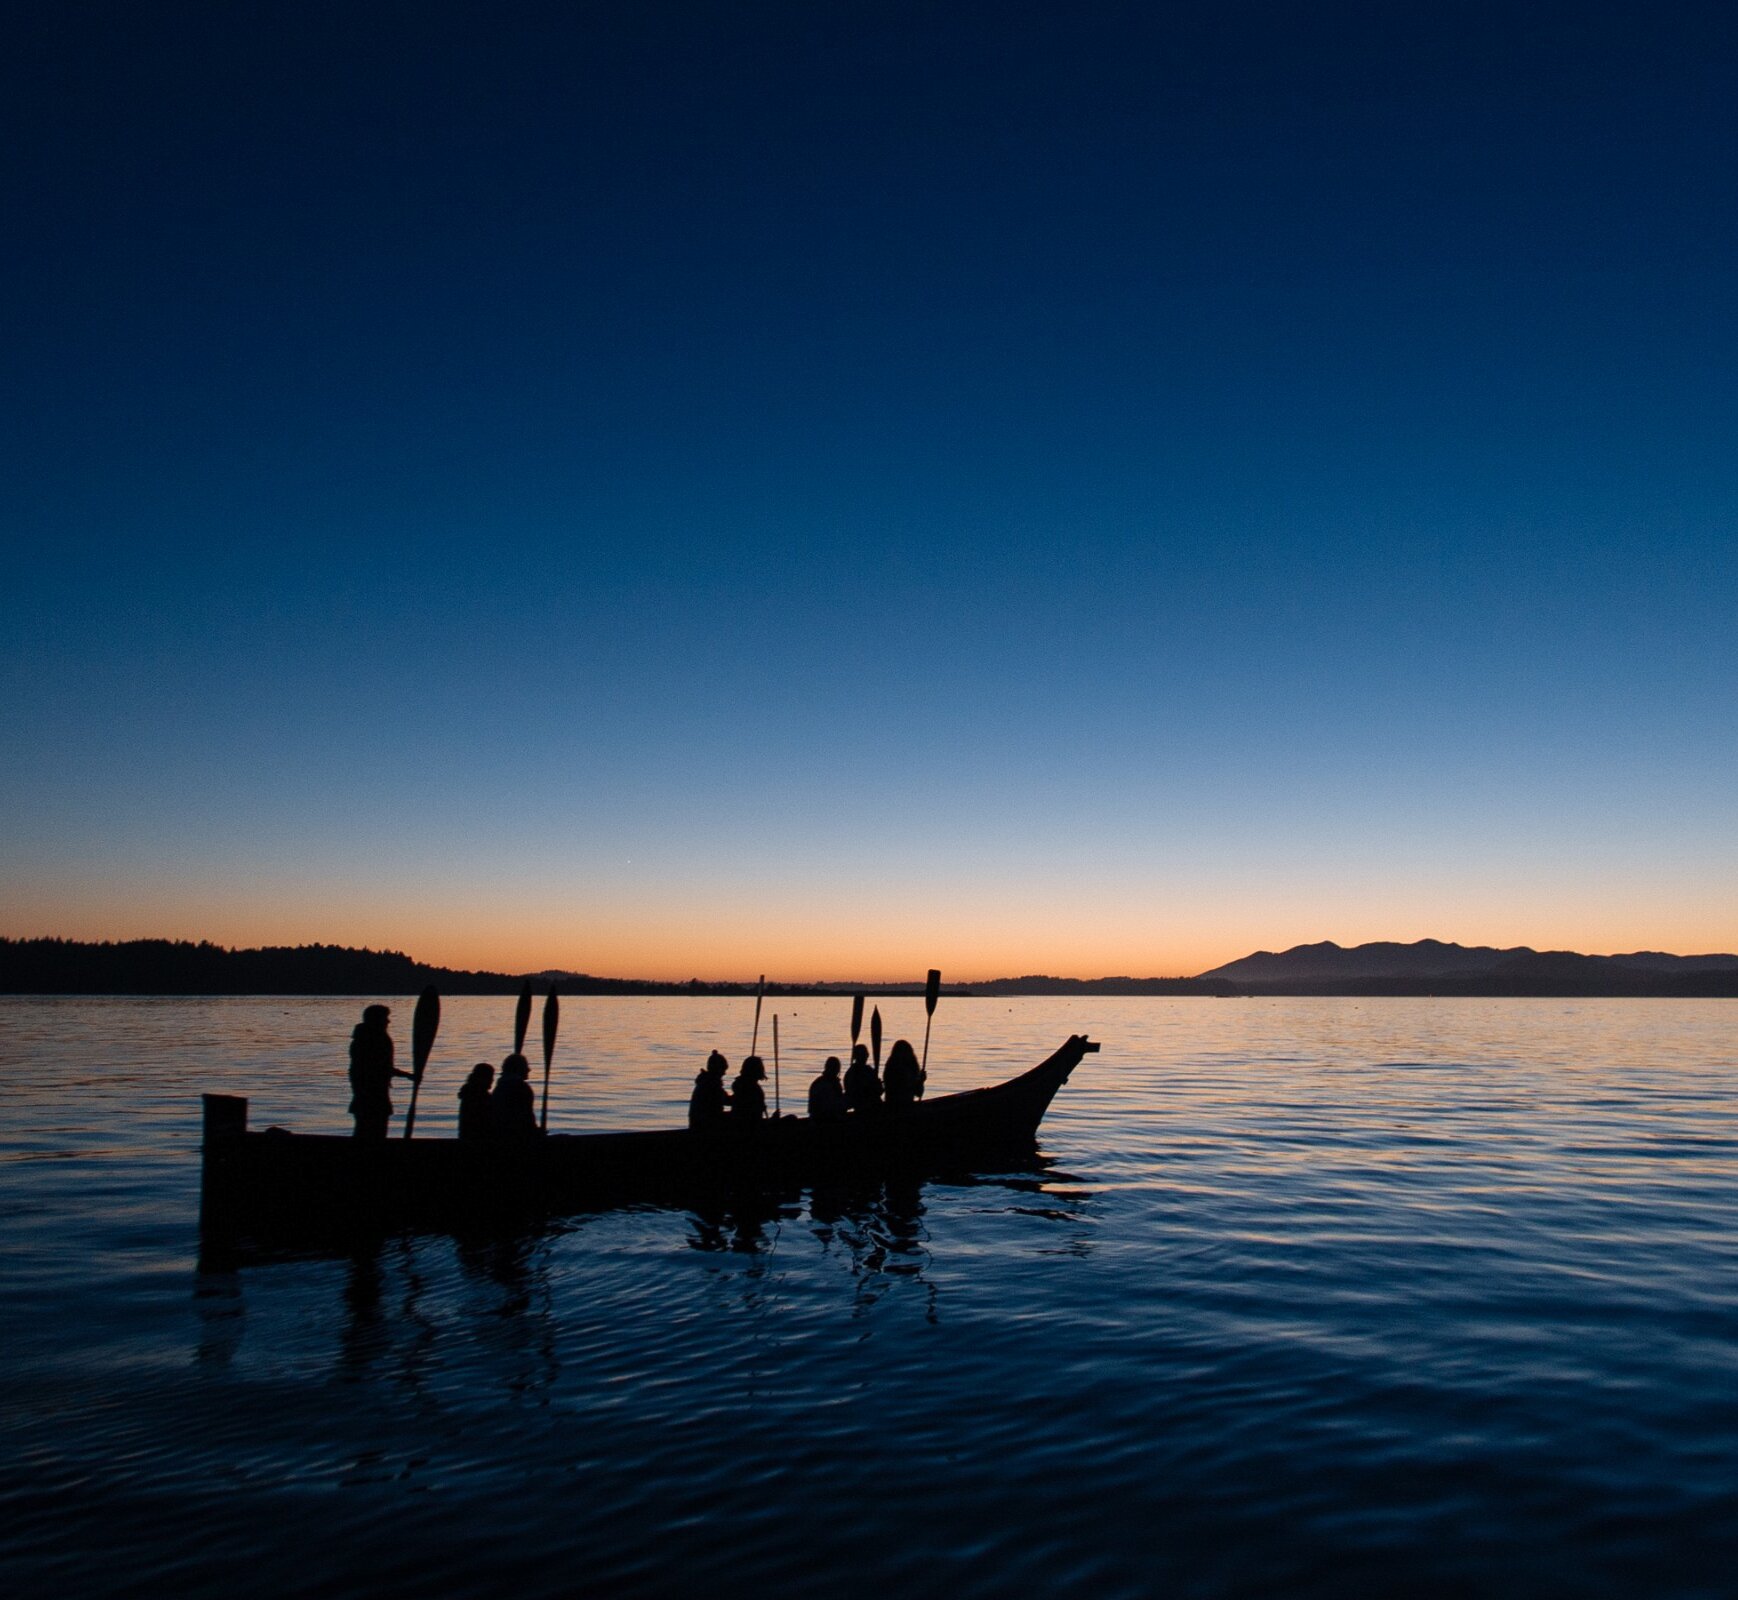 First Nations paddlers in a dug out canoe at sunset